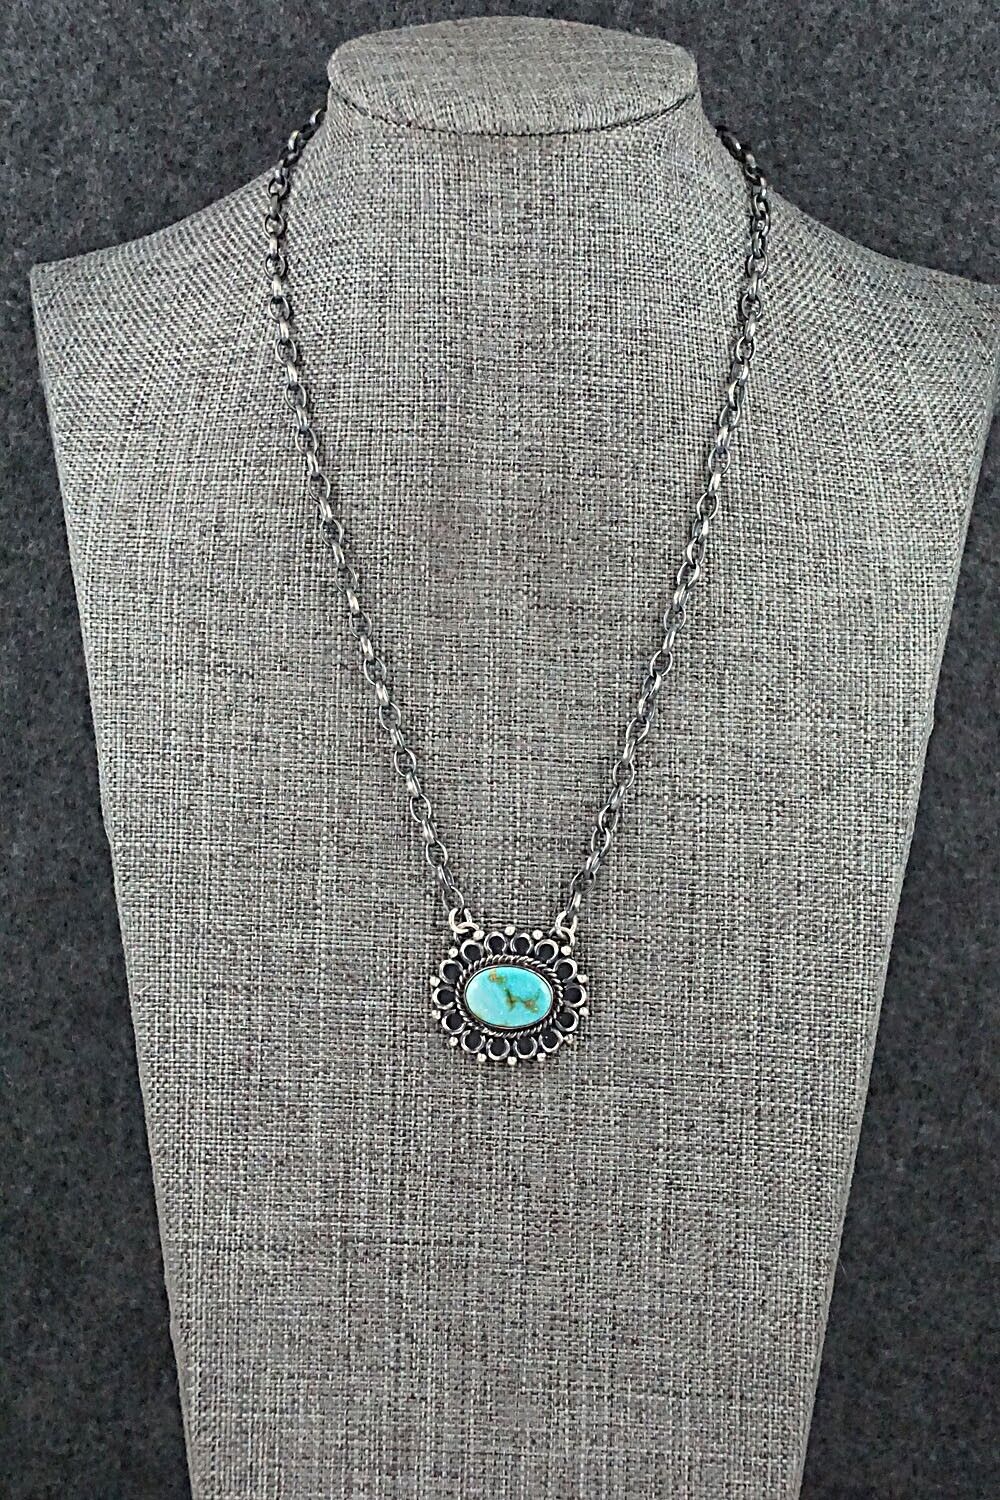 Turquoise & Sterling Silver Necklace - Joe Piaso